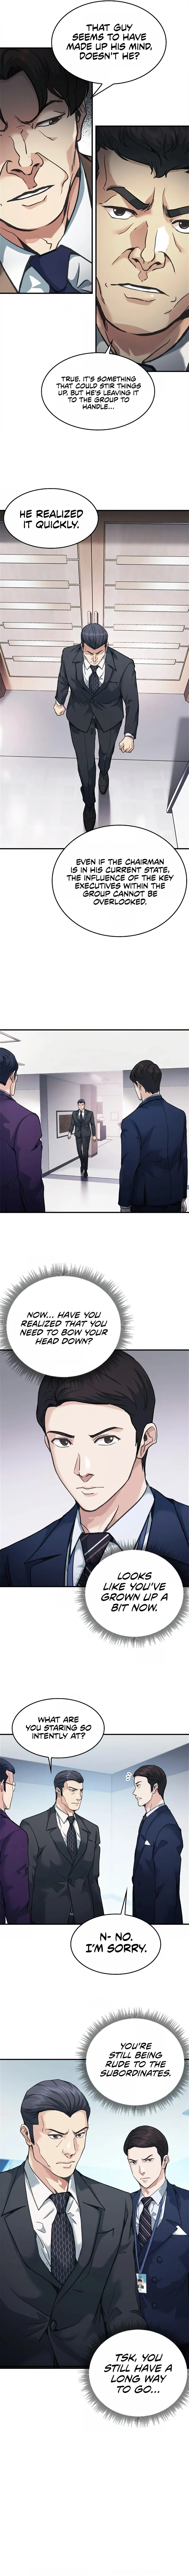 Chairman Kang: The Newcomer Chapter 19 page 6